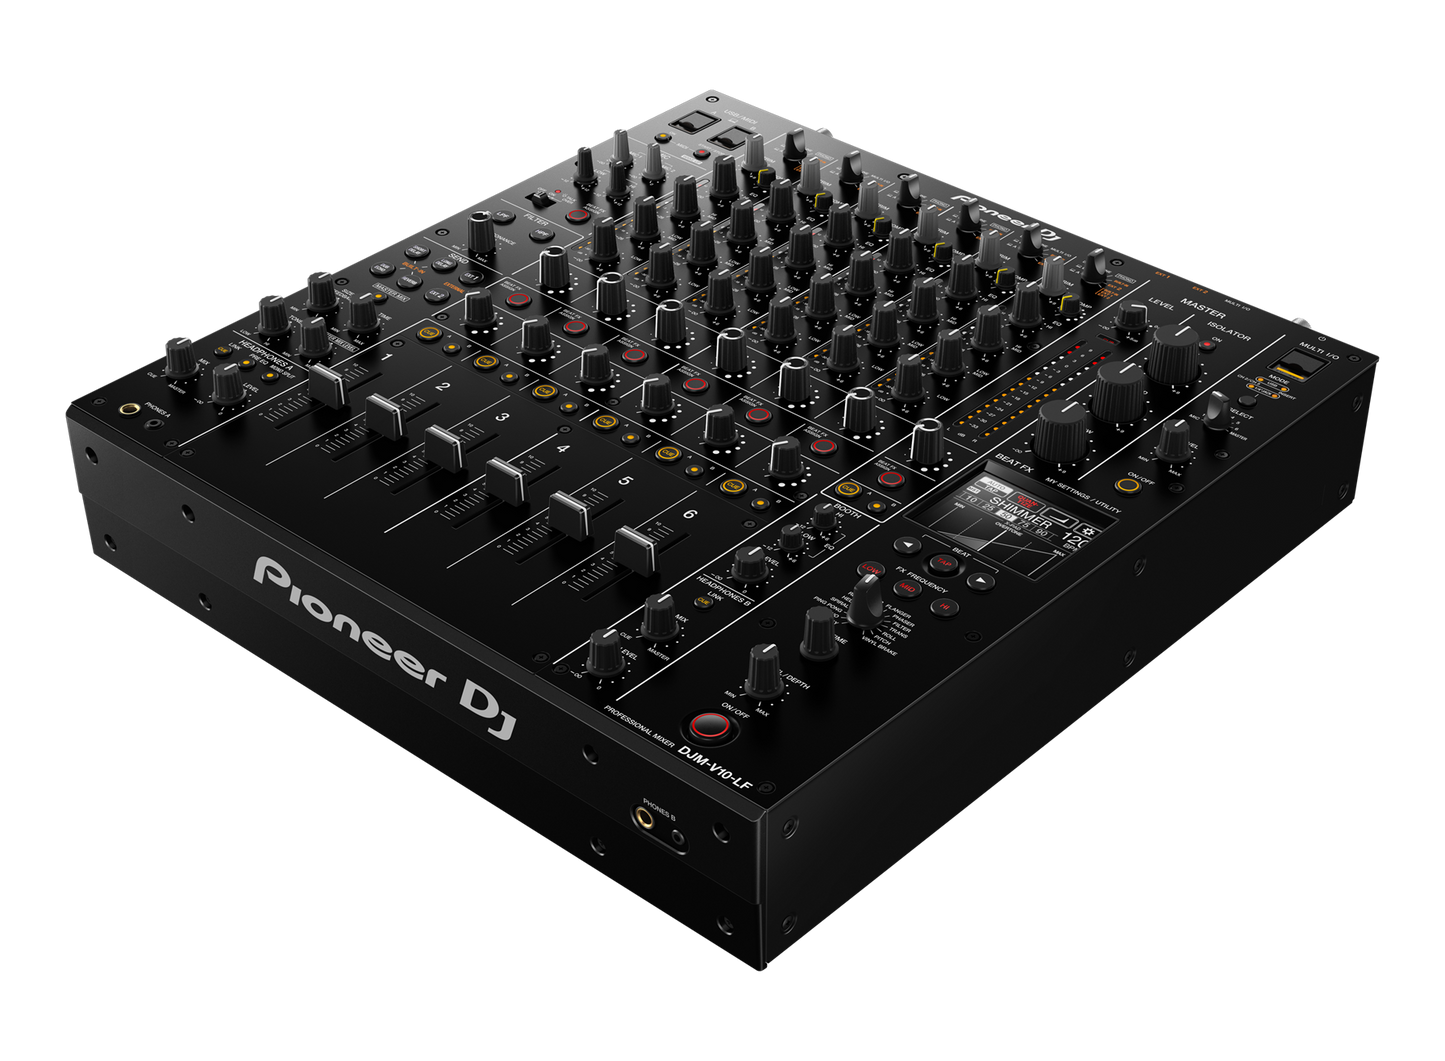 Pioneer DJ DJM-V10-LF Creative style 6-channel professional DJ mixer with long fader